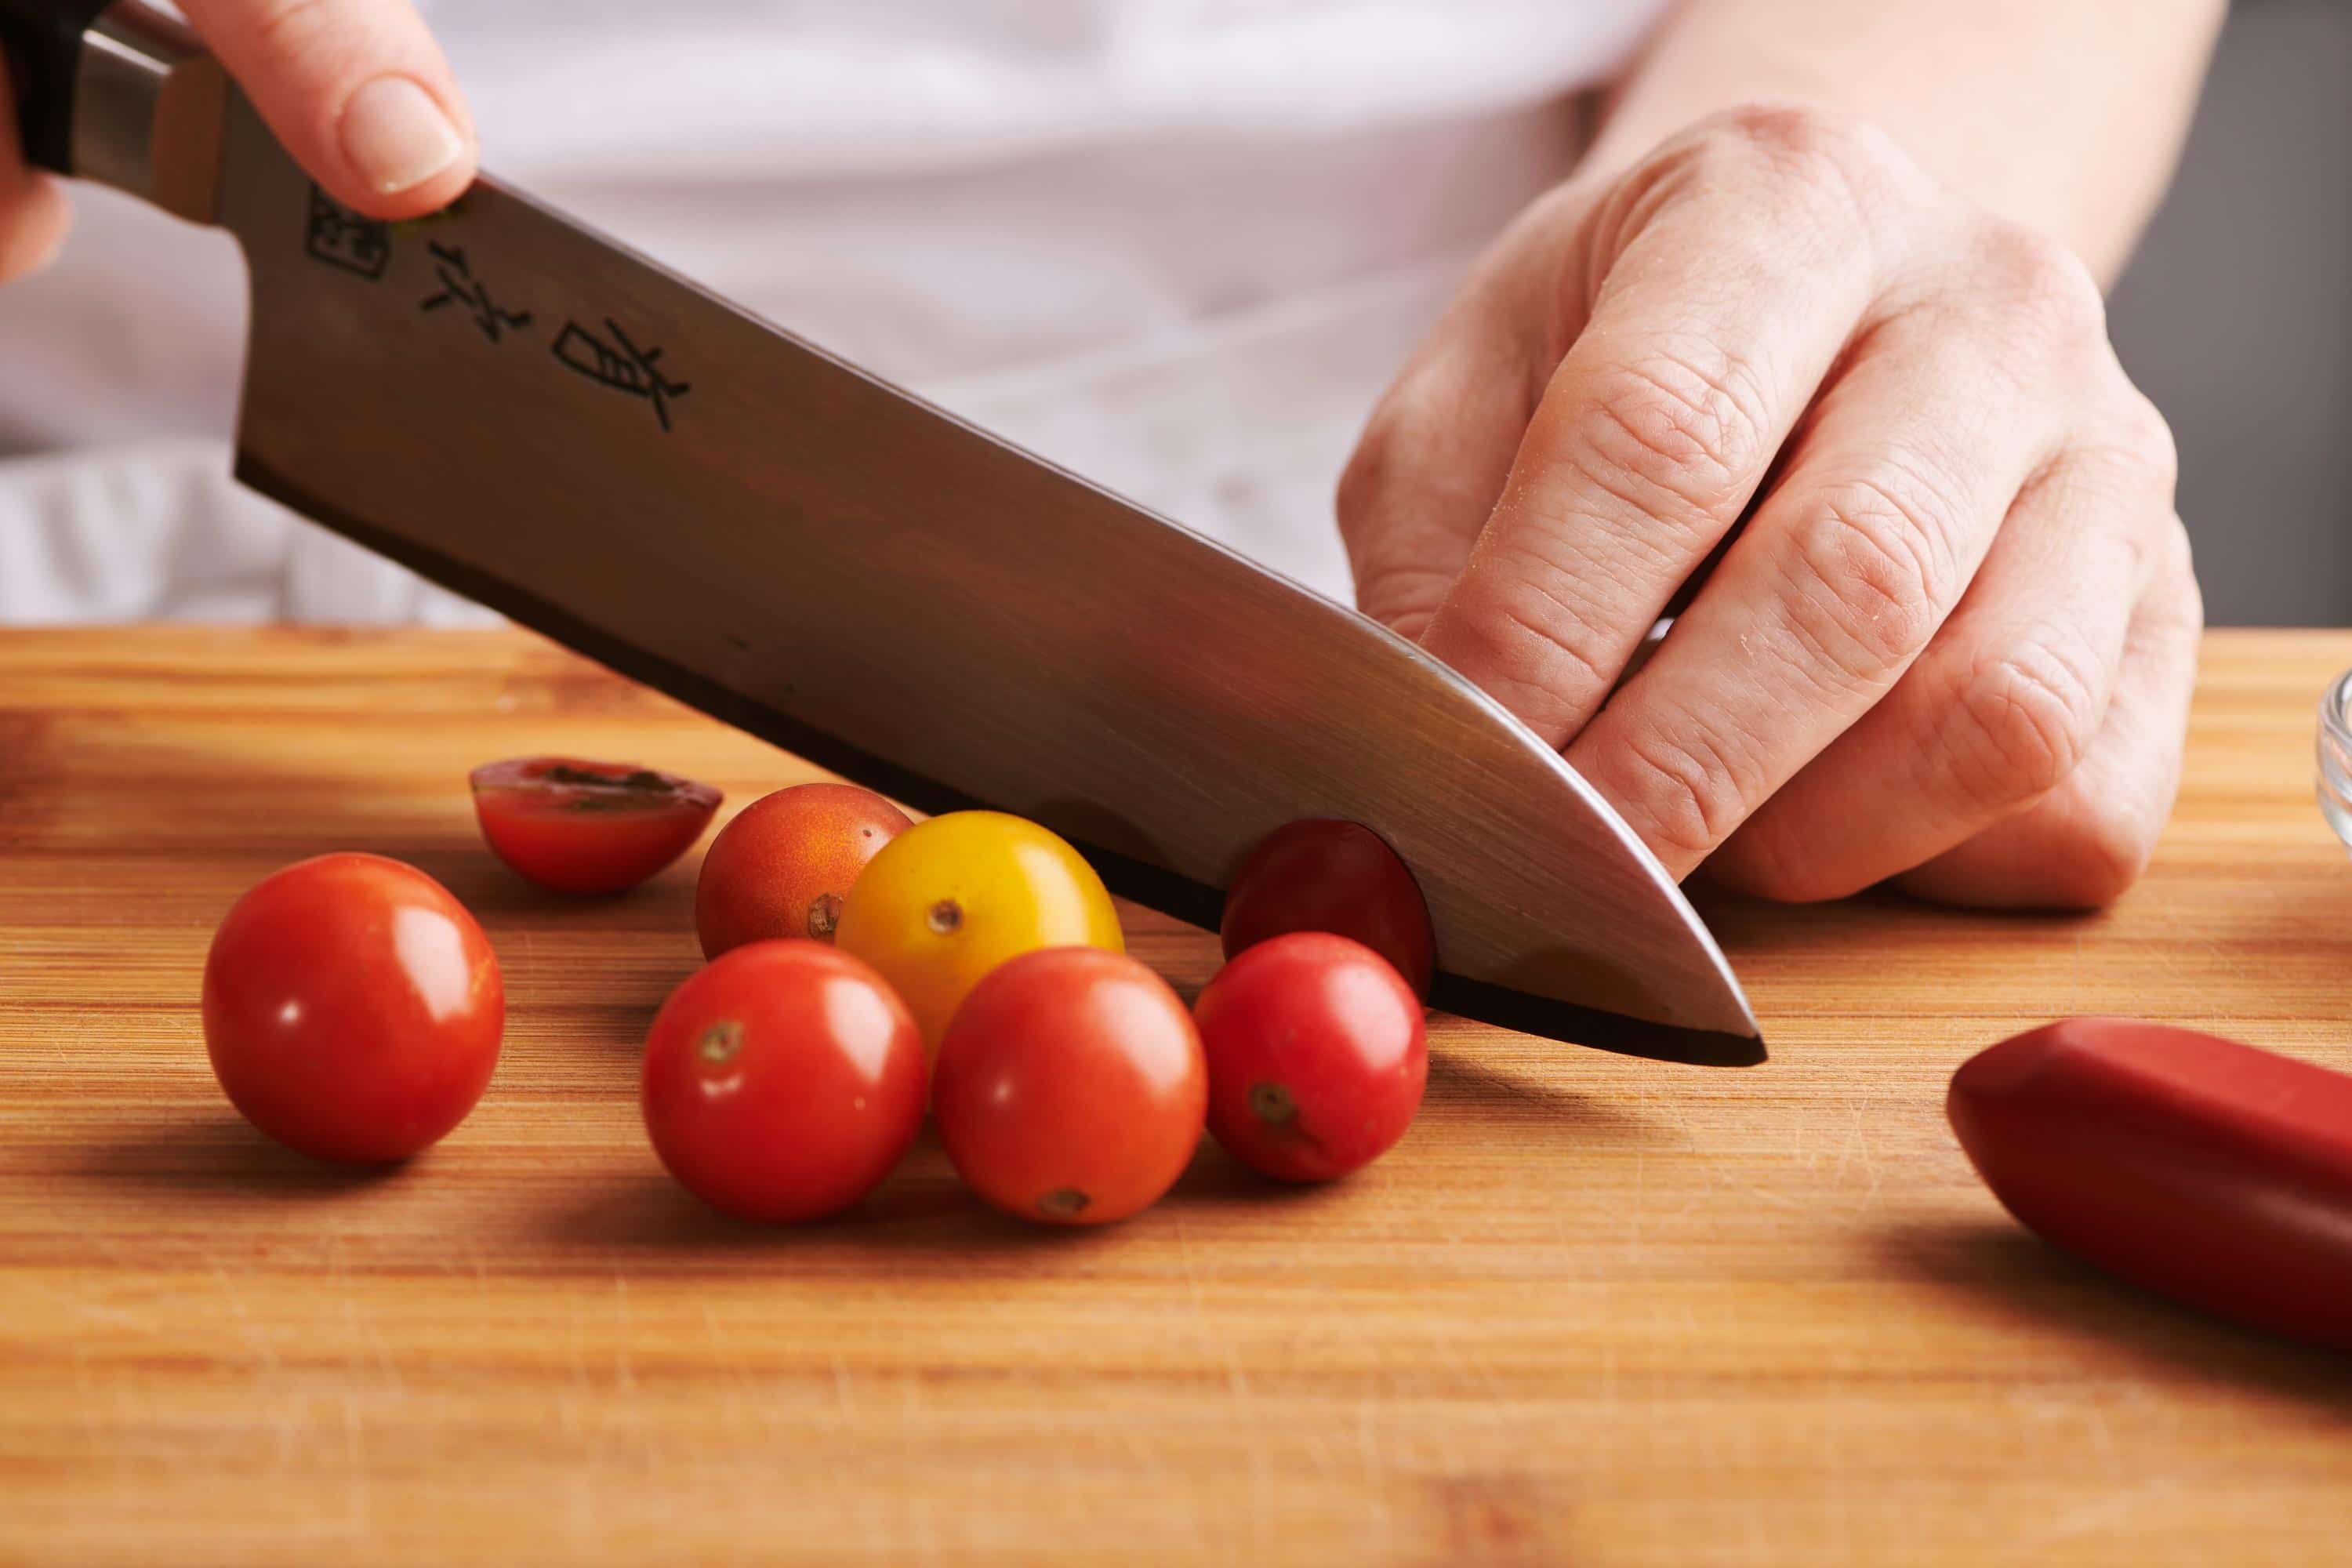 Slicing cherry tomatoes with chef knife on wood cutting board.